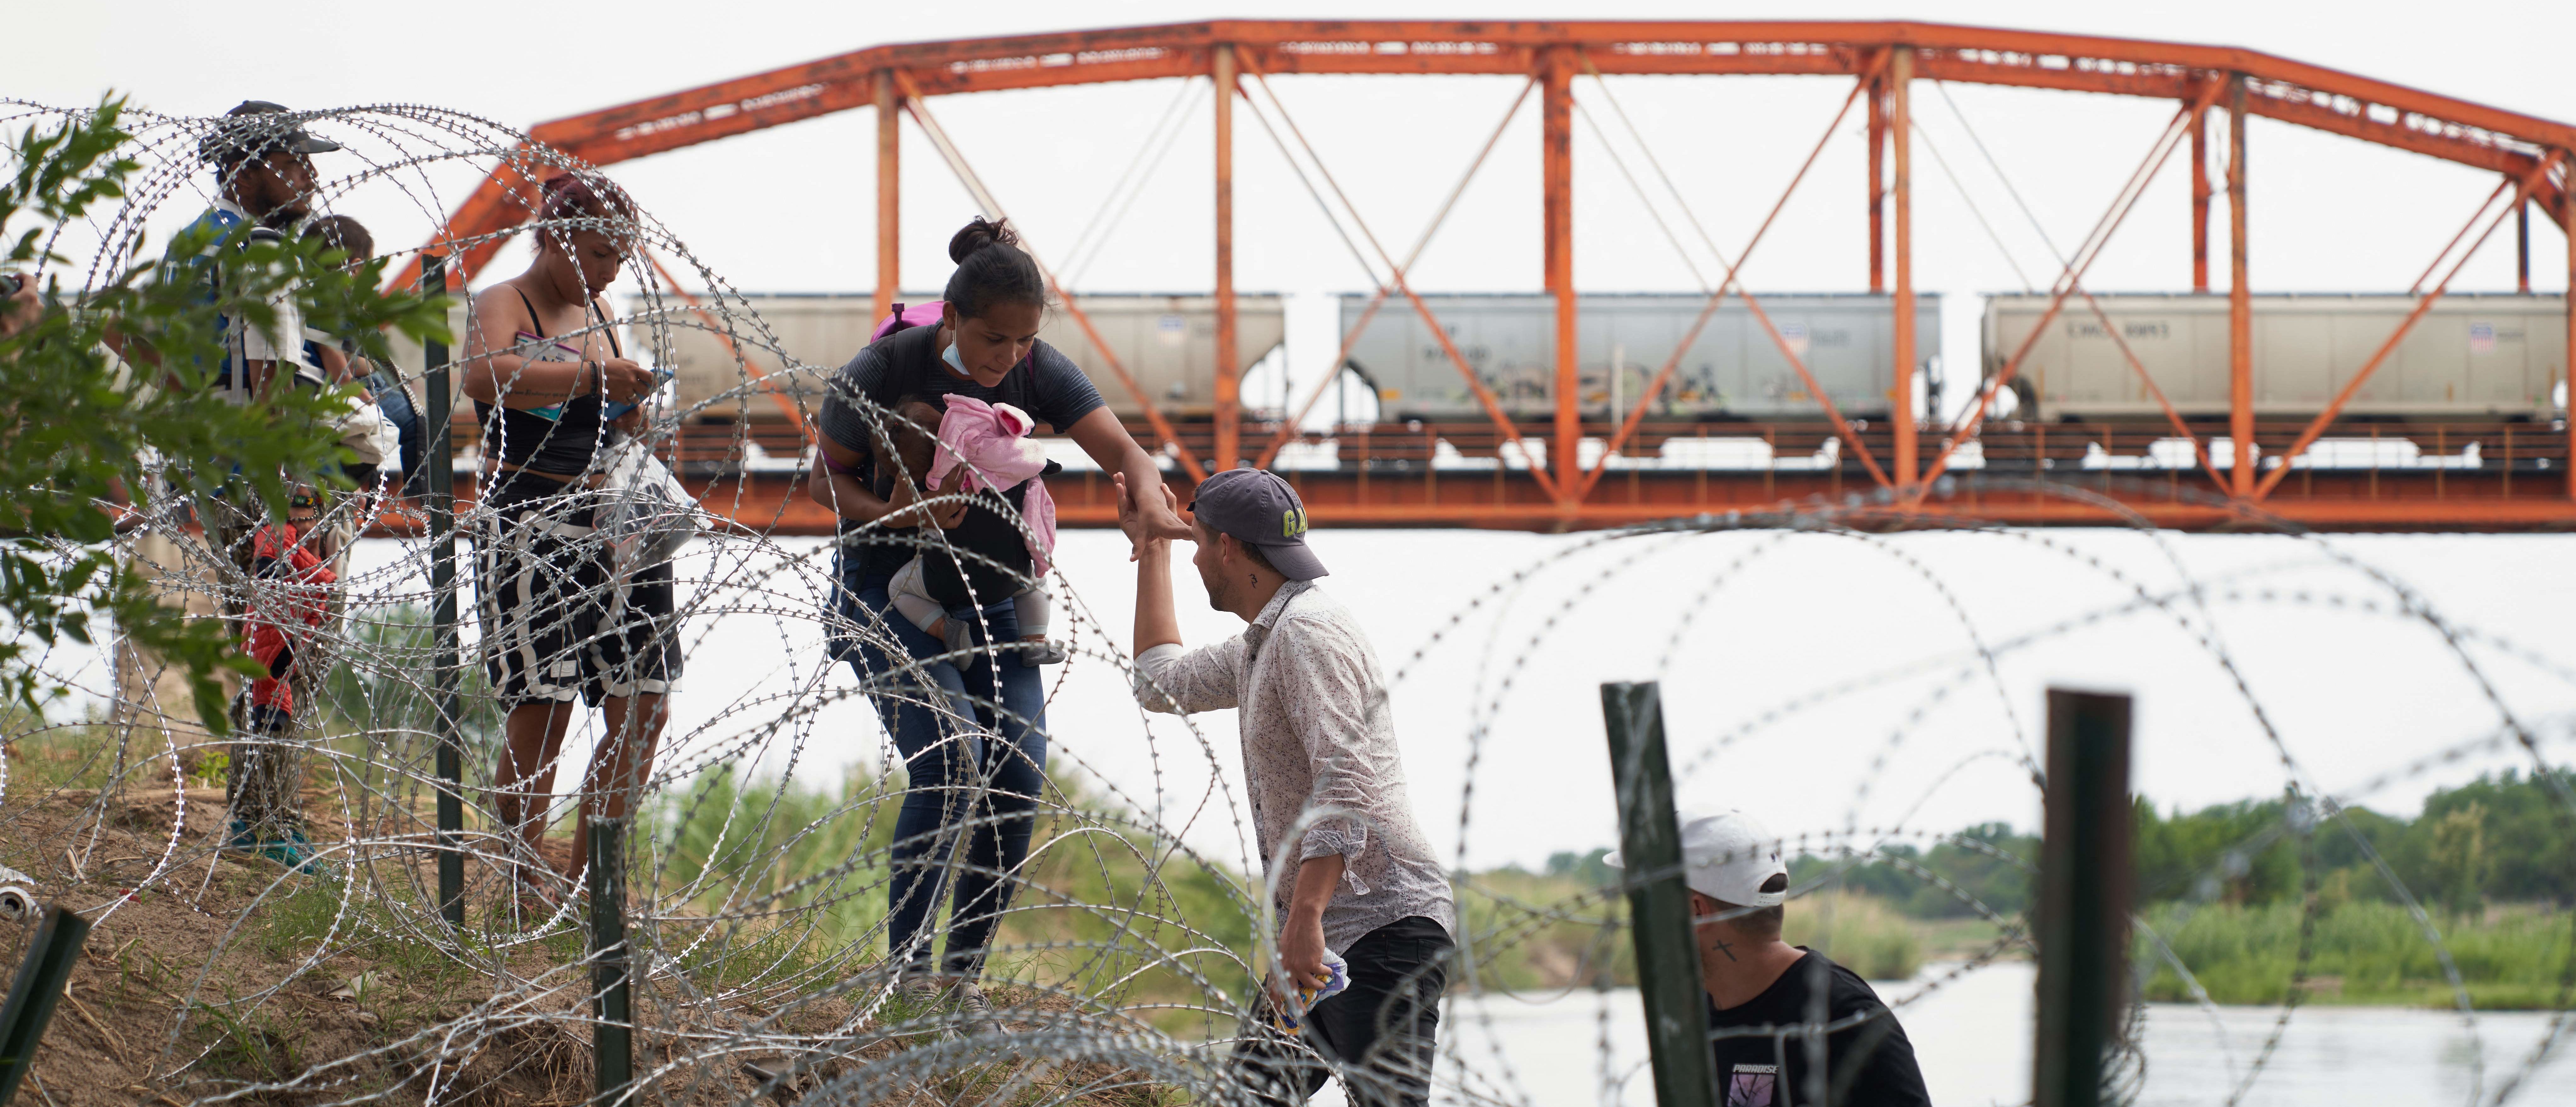 Migrants who illegally crossed the Rio Grande River walk along concertina wire in Eagle Pass, Texas, on May 22, 2022. - A Louisiana federal judge blocked the Biden administration on Friday from ending Title 42, a pandemic-related border restriction that allows for the immediate expulsion of asylum-seekers and other migrants. (Photo by allison dinner / AFP) (Photo by ALLISON DINNER/AFP via Getty Images)